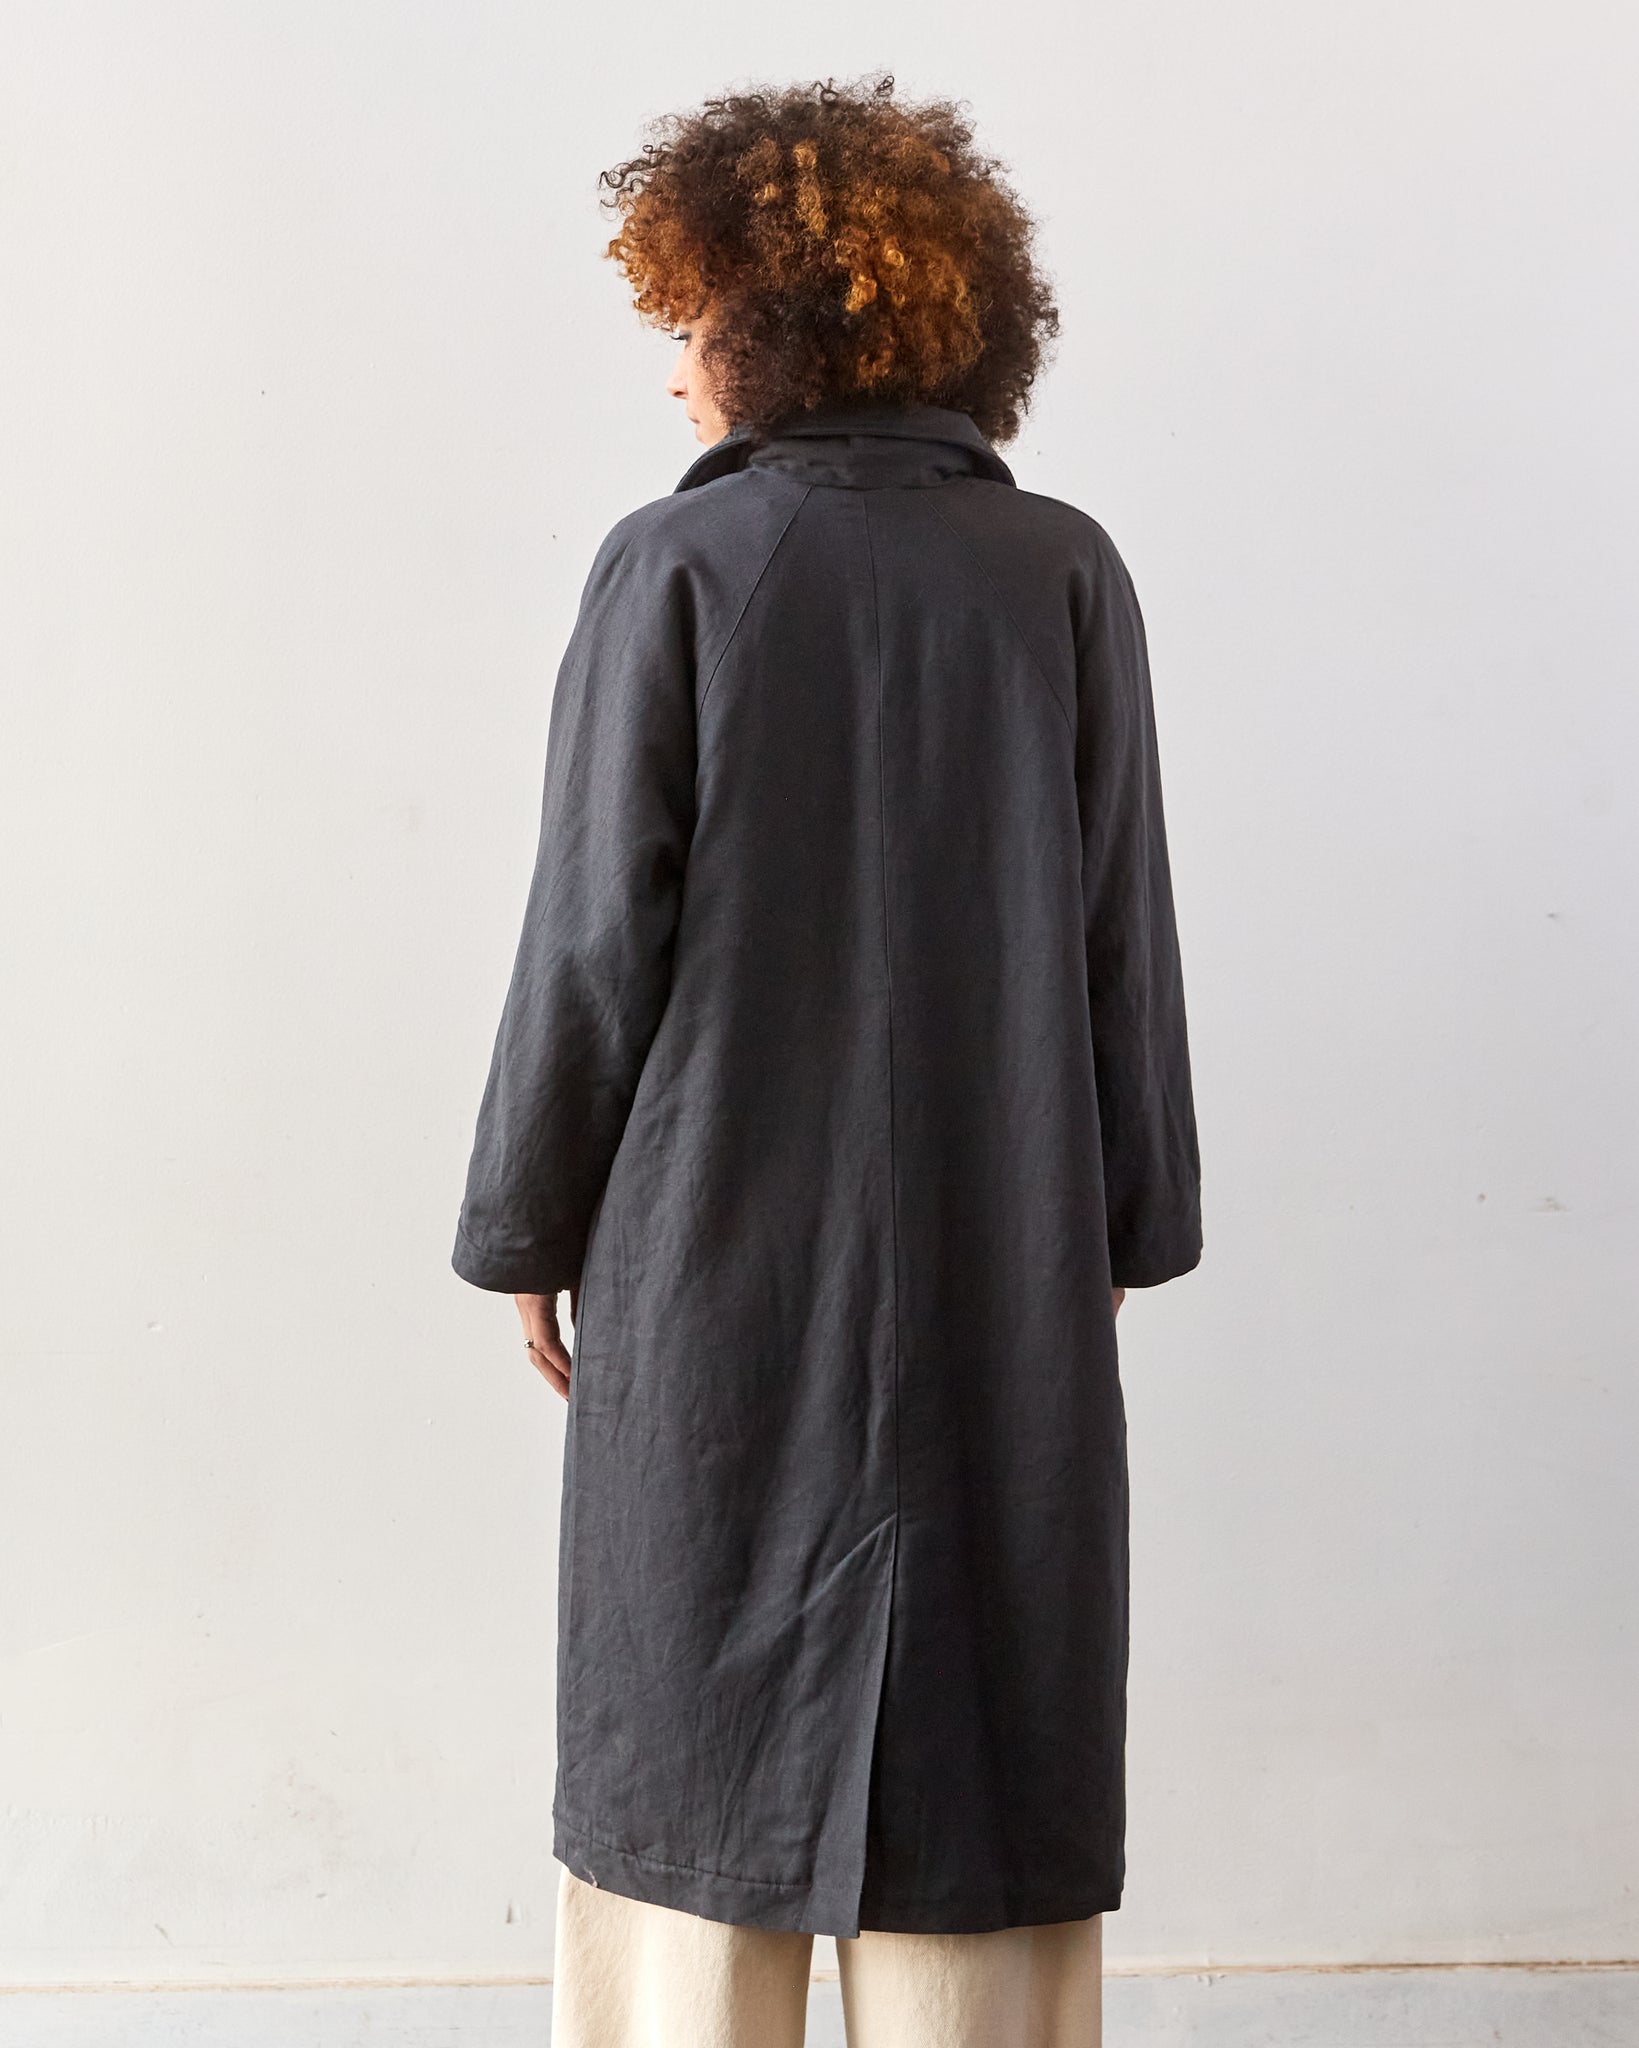 Micaela Greg Sherpa Lined Trench Coat, Charcoal